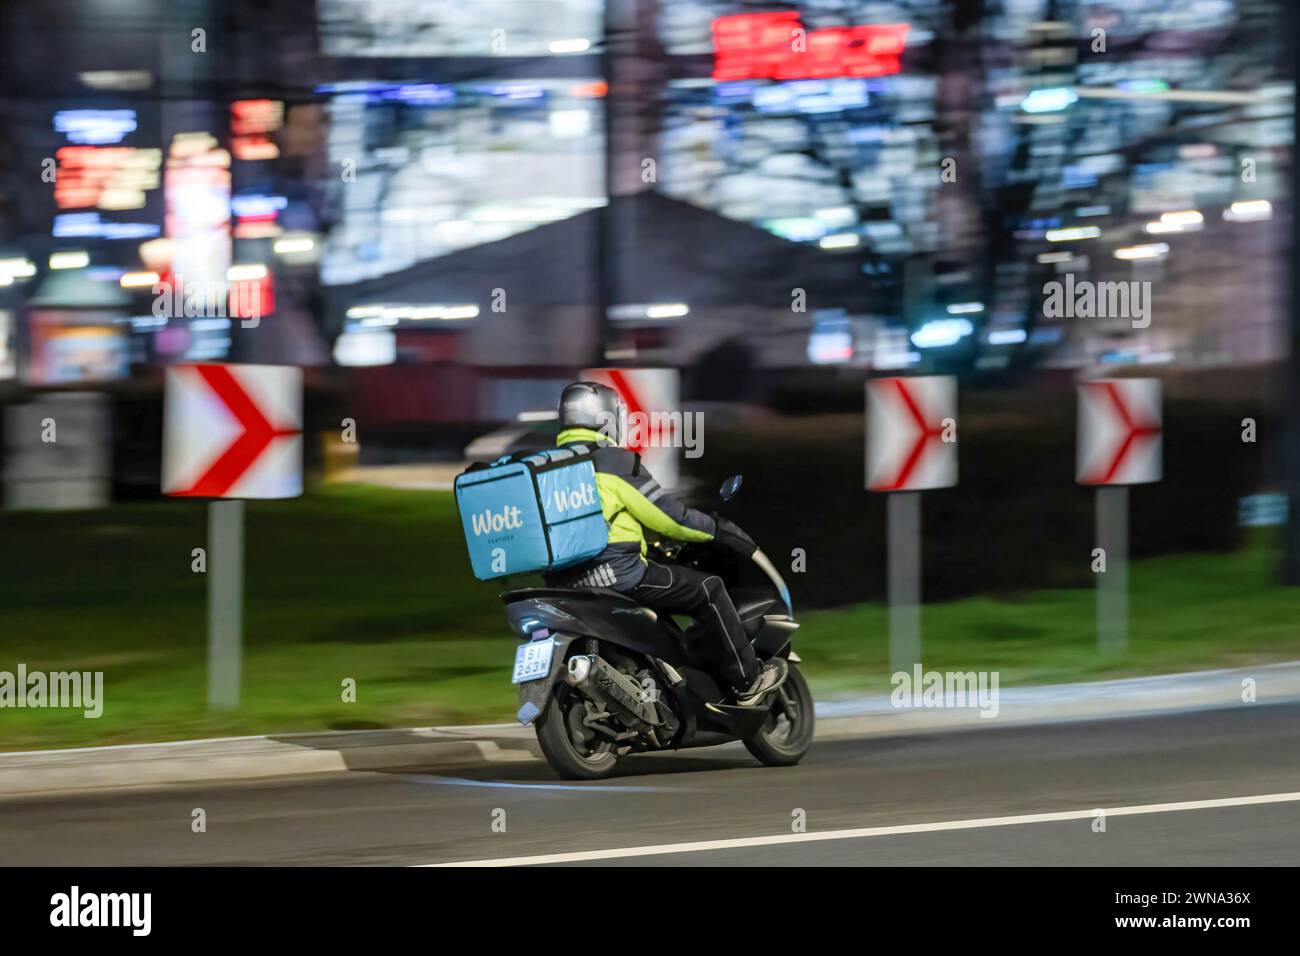 Wolt delivery rider seen riding on the street in Warsaw. Stock Photo